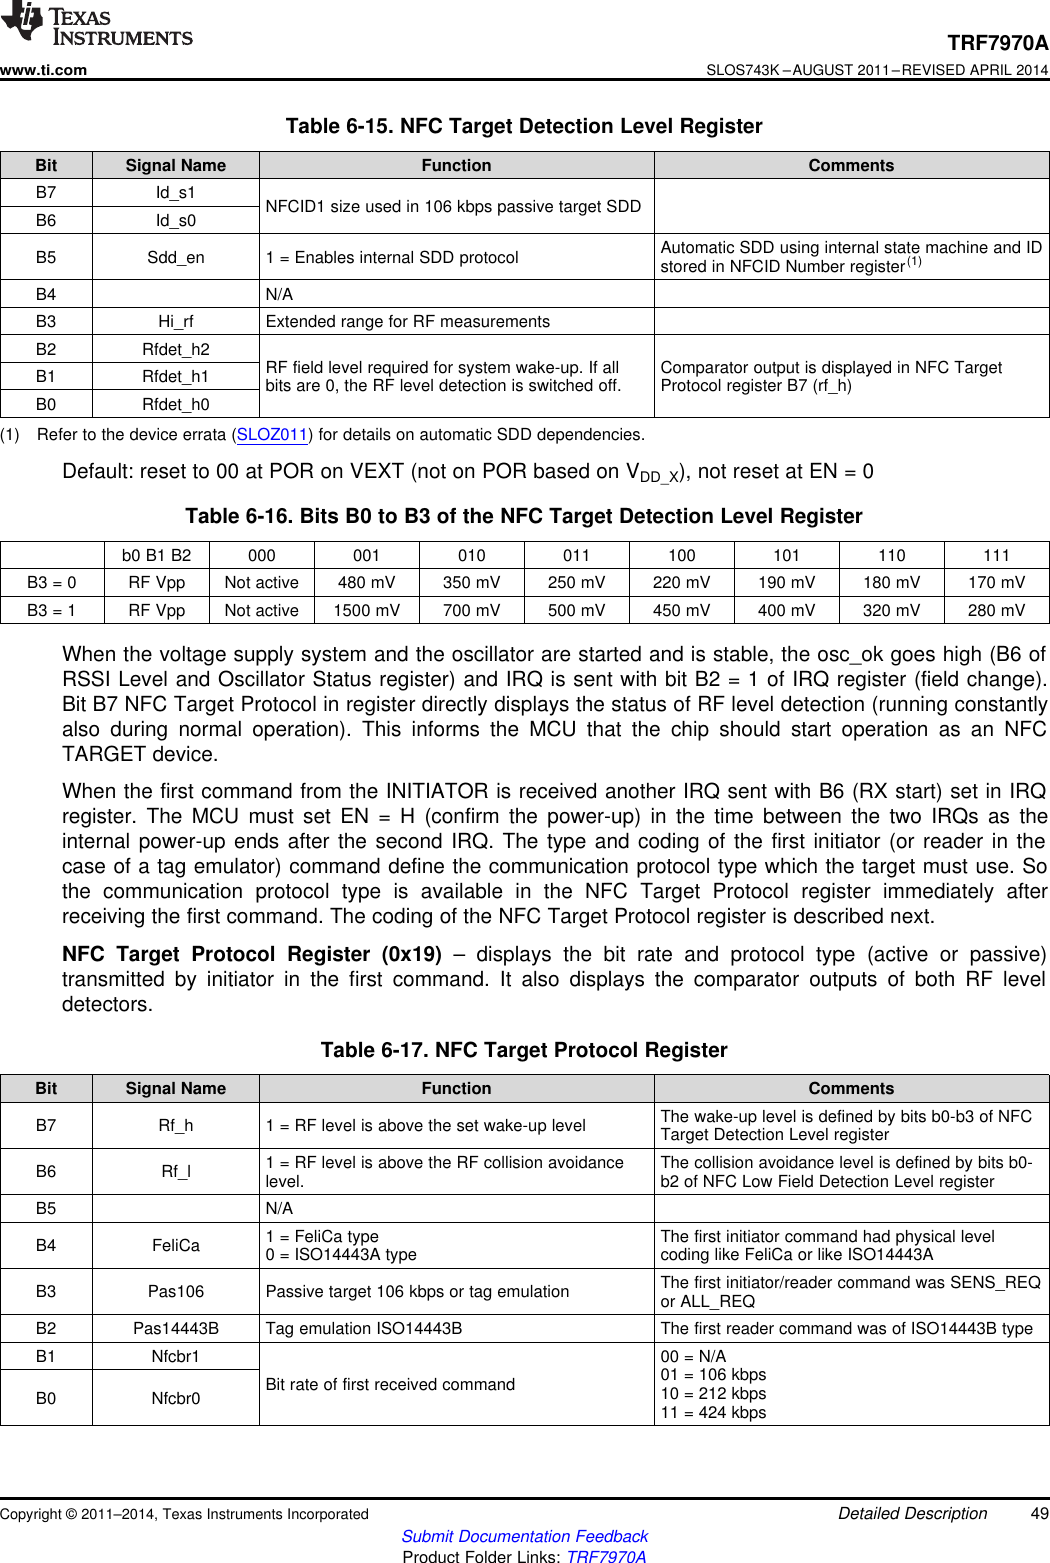 TRF7970Awww.ti.comSLOS743K –AUGUST 2011–REVISED APRIL 2014Table 6-15. NFC Target Detection Level RegisterBit Signal Name Function CommentsB7 Id_s1 NFCID1 size used in 106 kbps passive target SDDB6 Id_s0Automatic SDD using internal state machine and IDB5 Sdd_en 1 = Enables internal SDD protocol stored in NFCID Number register(1)B4 N/AB3 Hi_rf Extended range for RF measurementsB2 Rfdet_h2 RF field level required for system wake-up. If all Comparator output is displayed in NFC TargetB1 Rfdet_h1 bits are 0, the RF level detection is switched off. Protocol register B7 (rf_h)B0 Rfdet_h0(1) Refer to the device errata (SLOZ011) for details on automatic SDD dependencies.Default: reset to 00 at POR on VEXT (not on POR based on VDD_X), not reset at EN = 0Table 6-16. Bits B0 to B3 of the NFC Target Detection Level Registerb0 B1 B2 000 001 010 011 100 101 110 111B3 = 0 RF Vpp Not active 480 mV 350 mV 250 mV 220 mV 190 mV 180 mV 170 mVB3 = 1 RF Vpp Not active 1500 mV 700 mV 500 mV 450 mV 400 mV 320 mV 280 mVWhen the voltage supply system and the oscillator are started and is stable, the osc_ok goes high (B6 ofRSSI Level and Oscillator Status register) and IRQ is sent with bit B2 = 1 of IRQ register (field change).Bit B7 NFC Target Protocol in register directly displays the status of RF level detection (running constantlyalso during normal operation). This informs the MCU that the chip should start operation as an NFCTARGET device.When the first command from the INITIATOR is received another IRQ sent with B6 (RX start) set in IRQregister. The MCU must set EN = H (confirm the power-up) in the time between the two IRQs as theinternal power-up ends after the second IRQ. The type and coding of the first initiator (or reader in thecase of a tag emulator) command define the communication protocol type which the target must use. Sothe communication protocol type is available in the NFC Target Protocol register immediately afterreceiving the first command. The coding of the NFC Target Protocol register is described next.NFC Target Protocol Register (0x19) – displays the bit rate and protocol type (active or passive)transmitted by initiator in the first command. It also displays the comparator outputs of both RF leveldetectors.Table 6-17. NFC Target Protocol RegisterBit Signal Name Function CommentsThe wake-up level is defined by bits b0-b3 of NFCB7 Rf_h 1 = RF level is above the set wake-up level Target Detection Level register1 = RF level is above the RF collision avoidance The collision avoidance level is defined by bits b0-B6 Rf_l level. b2 of NFC Low Field Detection Level registerB5 N/A1 = FeliCa type The first initiator command had physical levelB4 FeliCa 0 = ISO14443A type coding like FeliCa or like ISO14443AThe first initiator/reader command was SENS_REQB3 Pas106 Passive target 106 kbps or tag emulation or ALL_REQB2 Pas14443B Tag emulation ISO14443B The first reader command was of ISO14443B typeB1 Nfcbr1 00 = N/A01 = 106 kbpsBit rate of first received command 10 = 212 kbpsB0 Nfcbr0 11 = 424 kbpsCopyright © 2011–2014, Texas Instruments Incorporated Detailed Description 49Submit Documentation FeedbackProduct Folder Links: TRF7970A